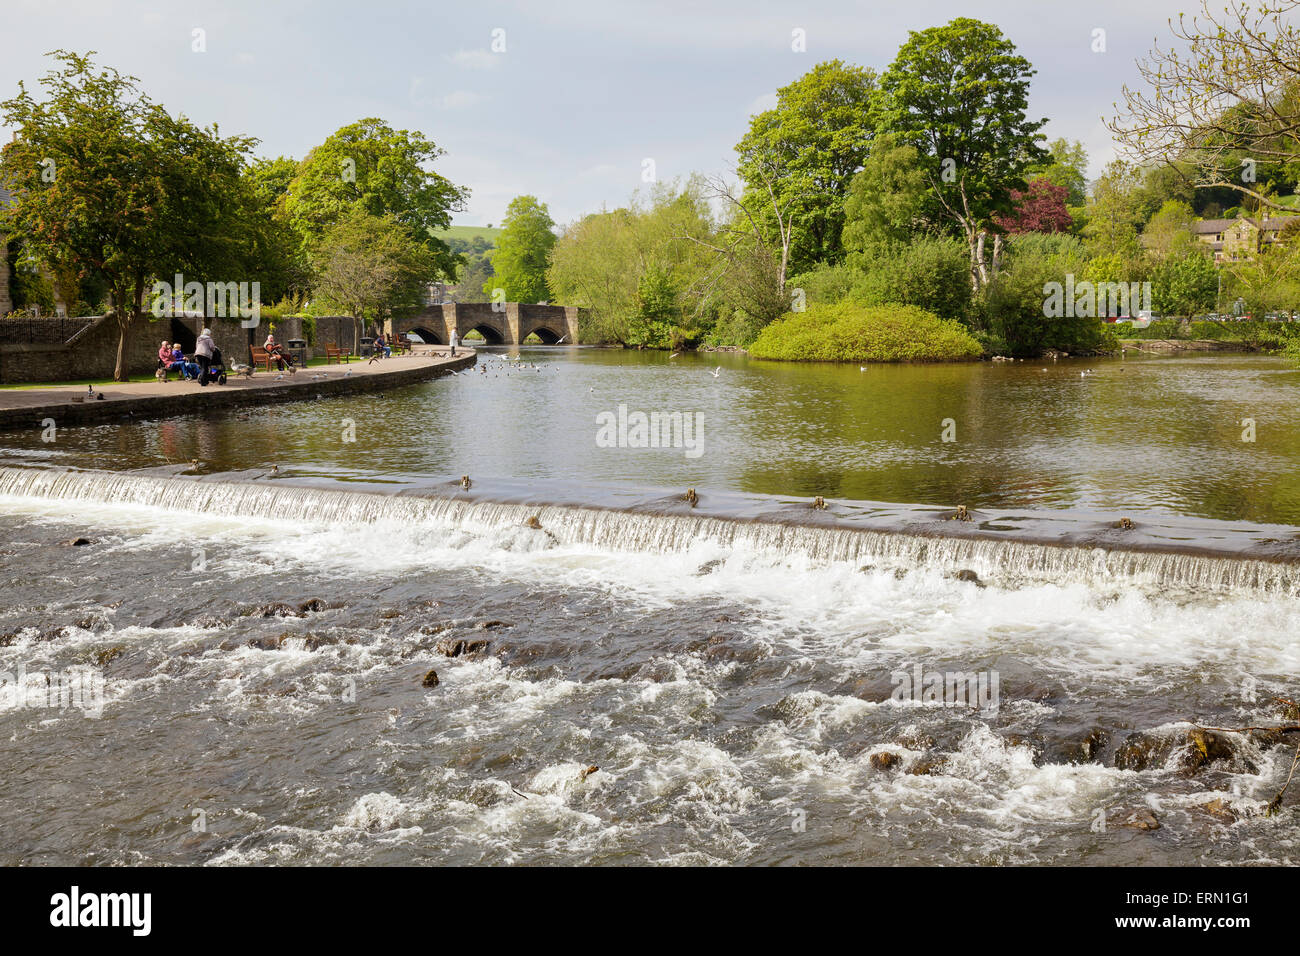 River Wye with old Bridge, Bakewell, Derbyshire, England Stock Photo